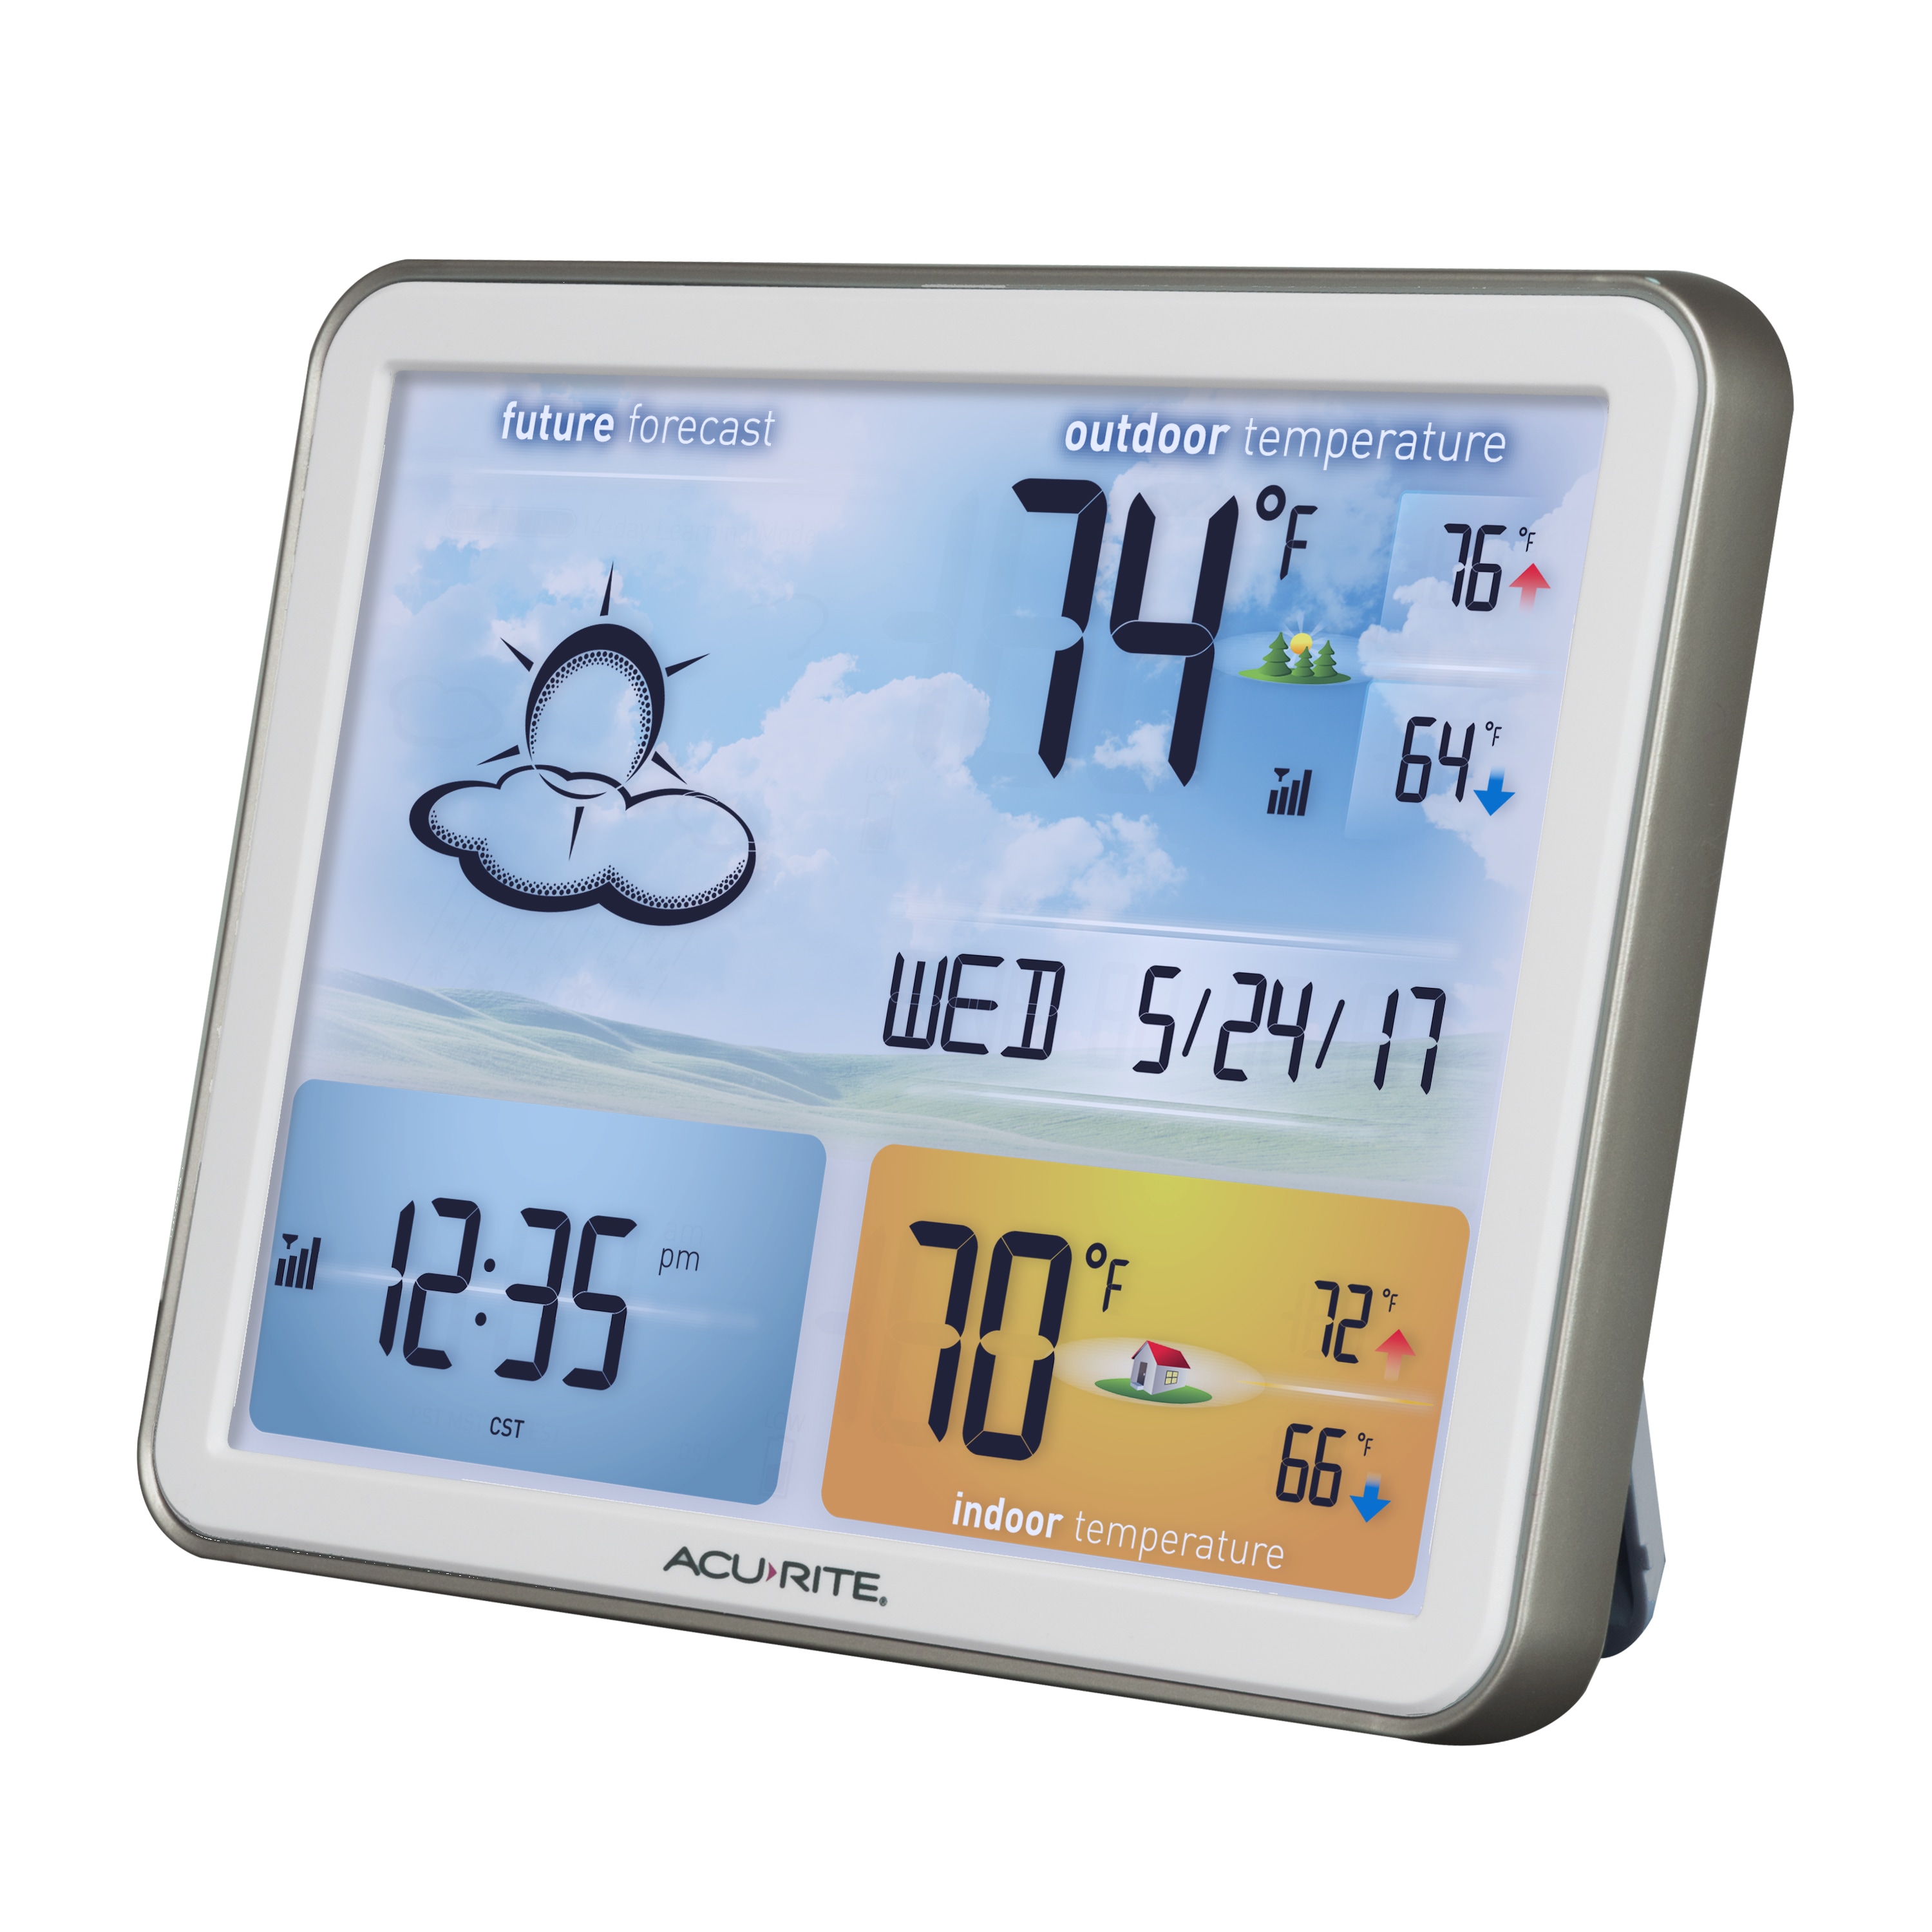 AcuRite Wireless Weather Station with Forecast, Indoor/Outdoor Temperature  and Humidity, Country Home Products